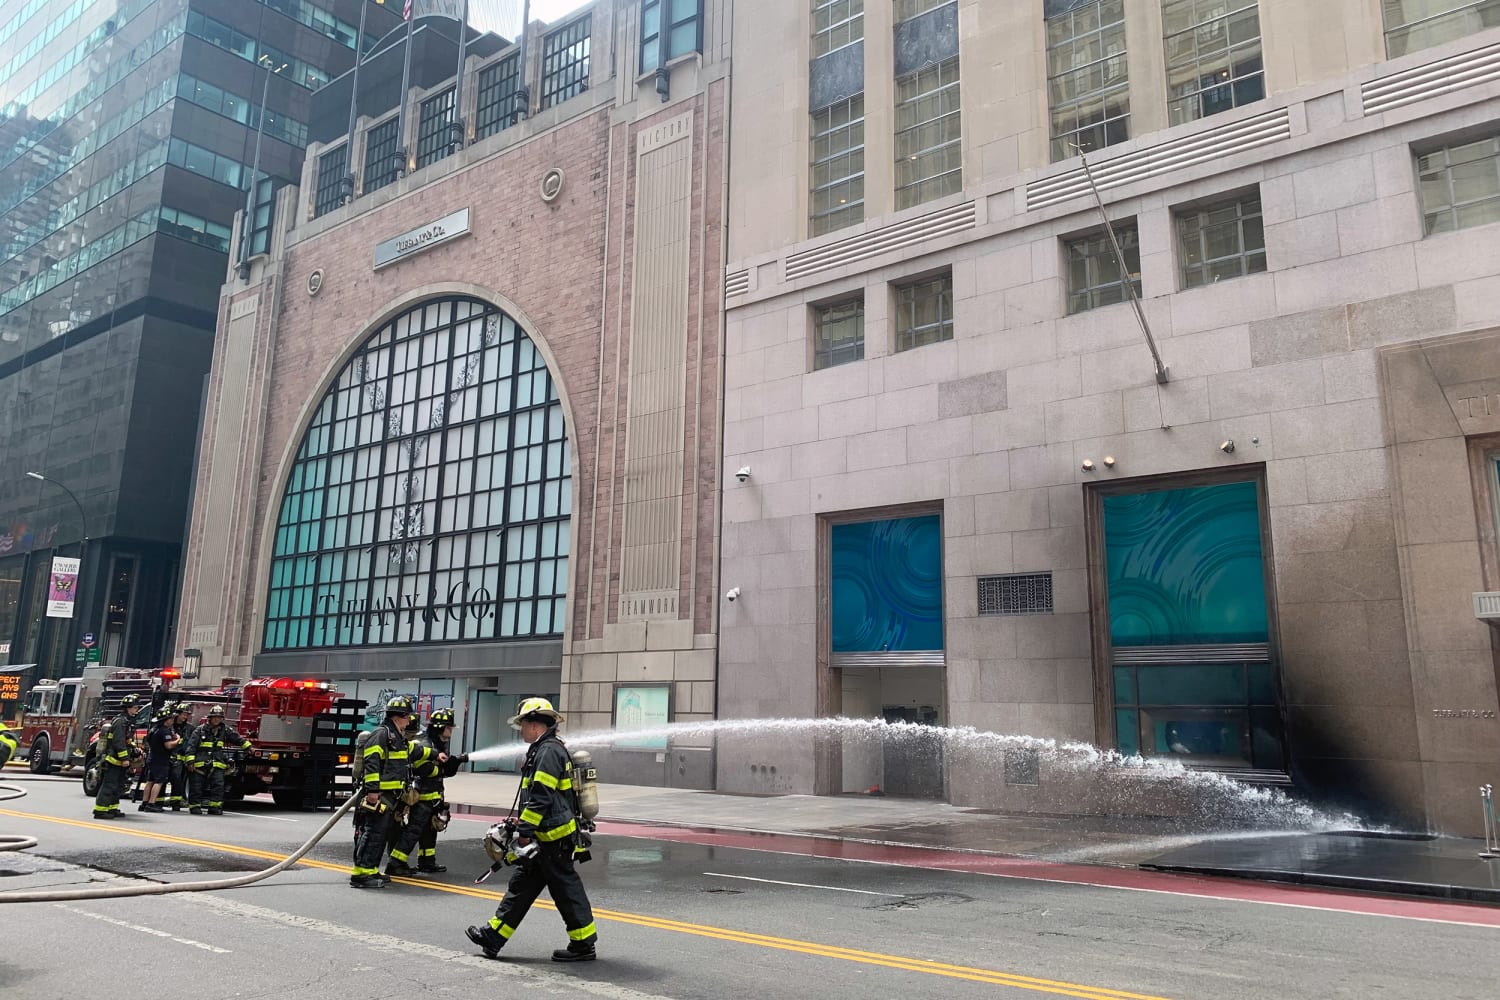 Tiffany and Co. Store Catches on Fire After Reopening in April